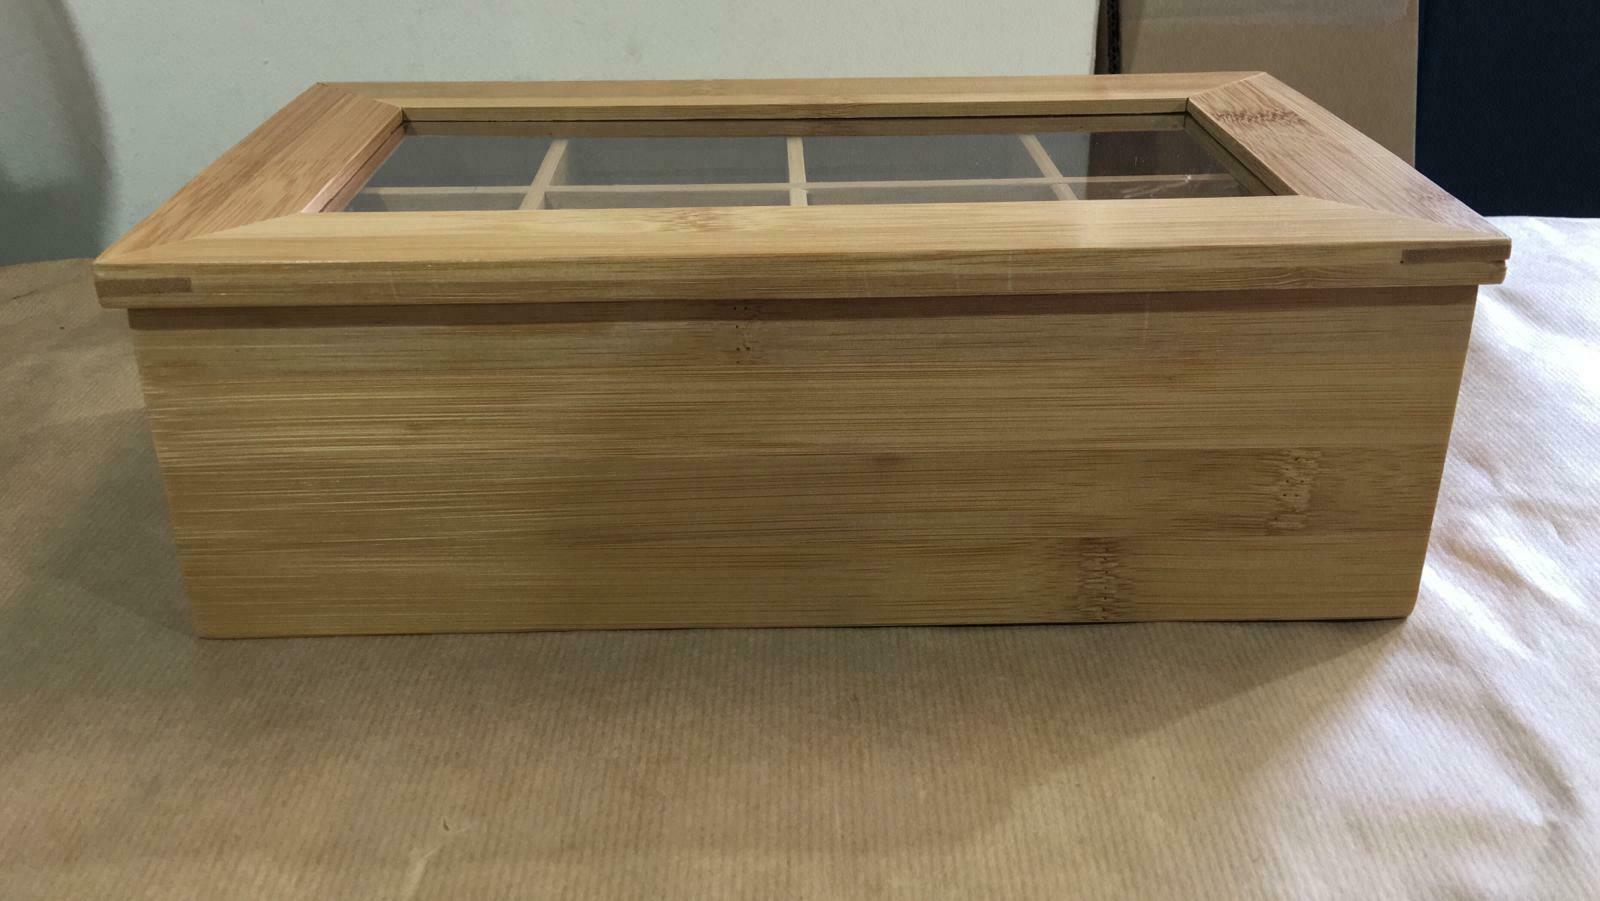 Relaxdays Bamboo Box with 8 Compartments Brown, 9x28x16 cm for Fresh Tea 3370